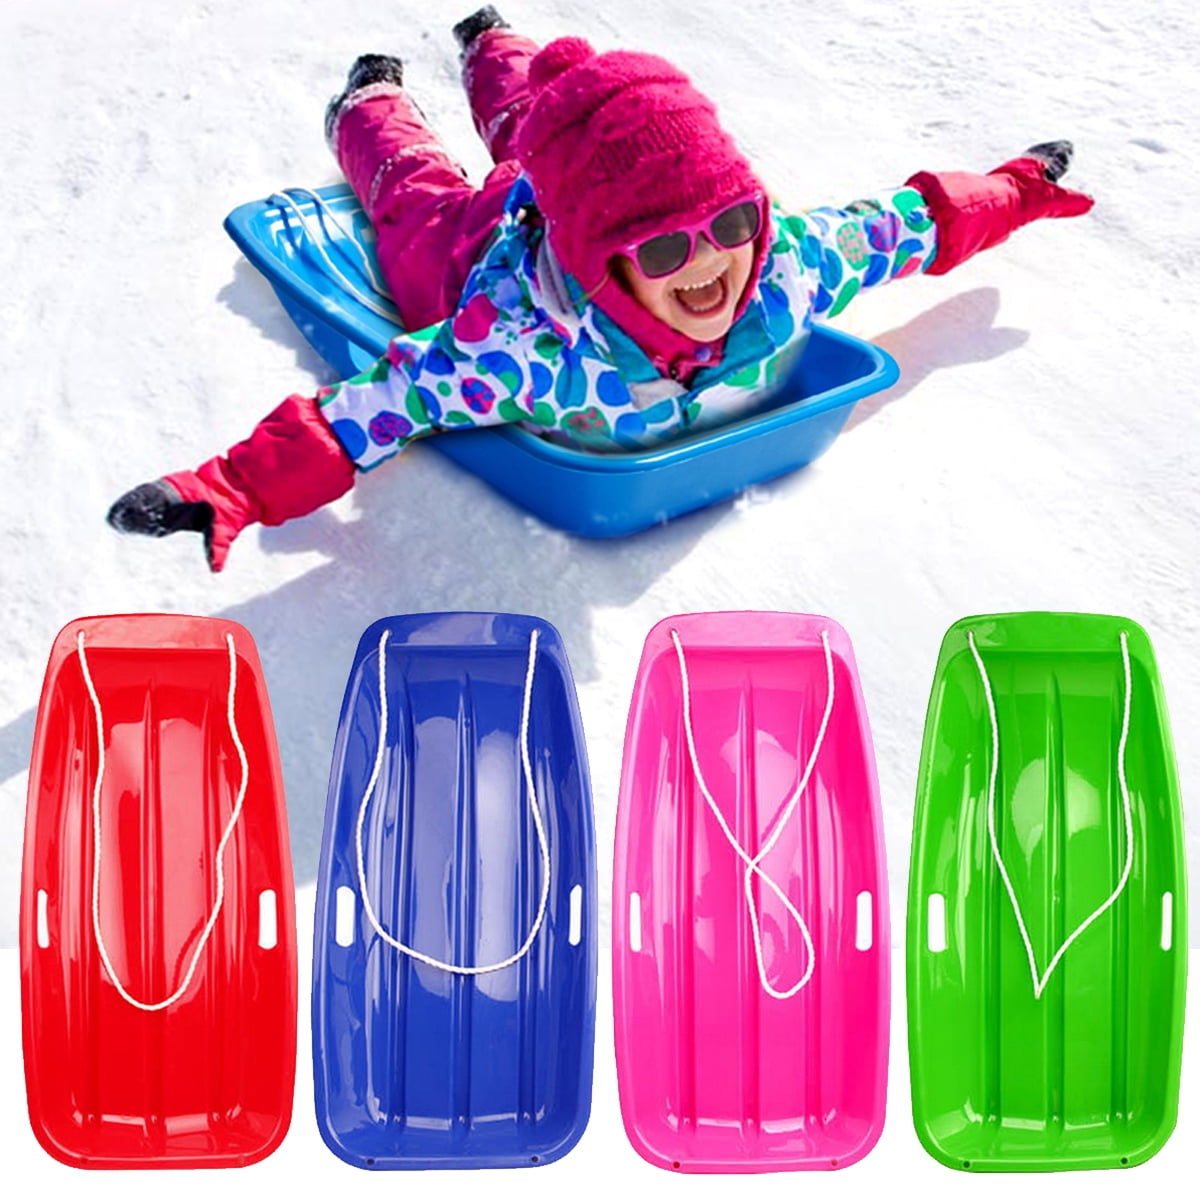 LARGE PLASTIC SLEDGE WITH ROPE WINTER OUTDOOR SNOW KIDS TOBOGGAN SLED BLUE 